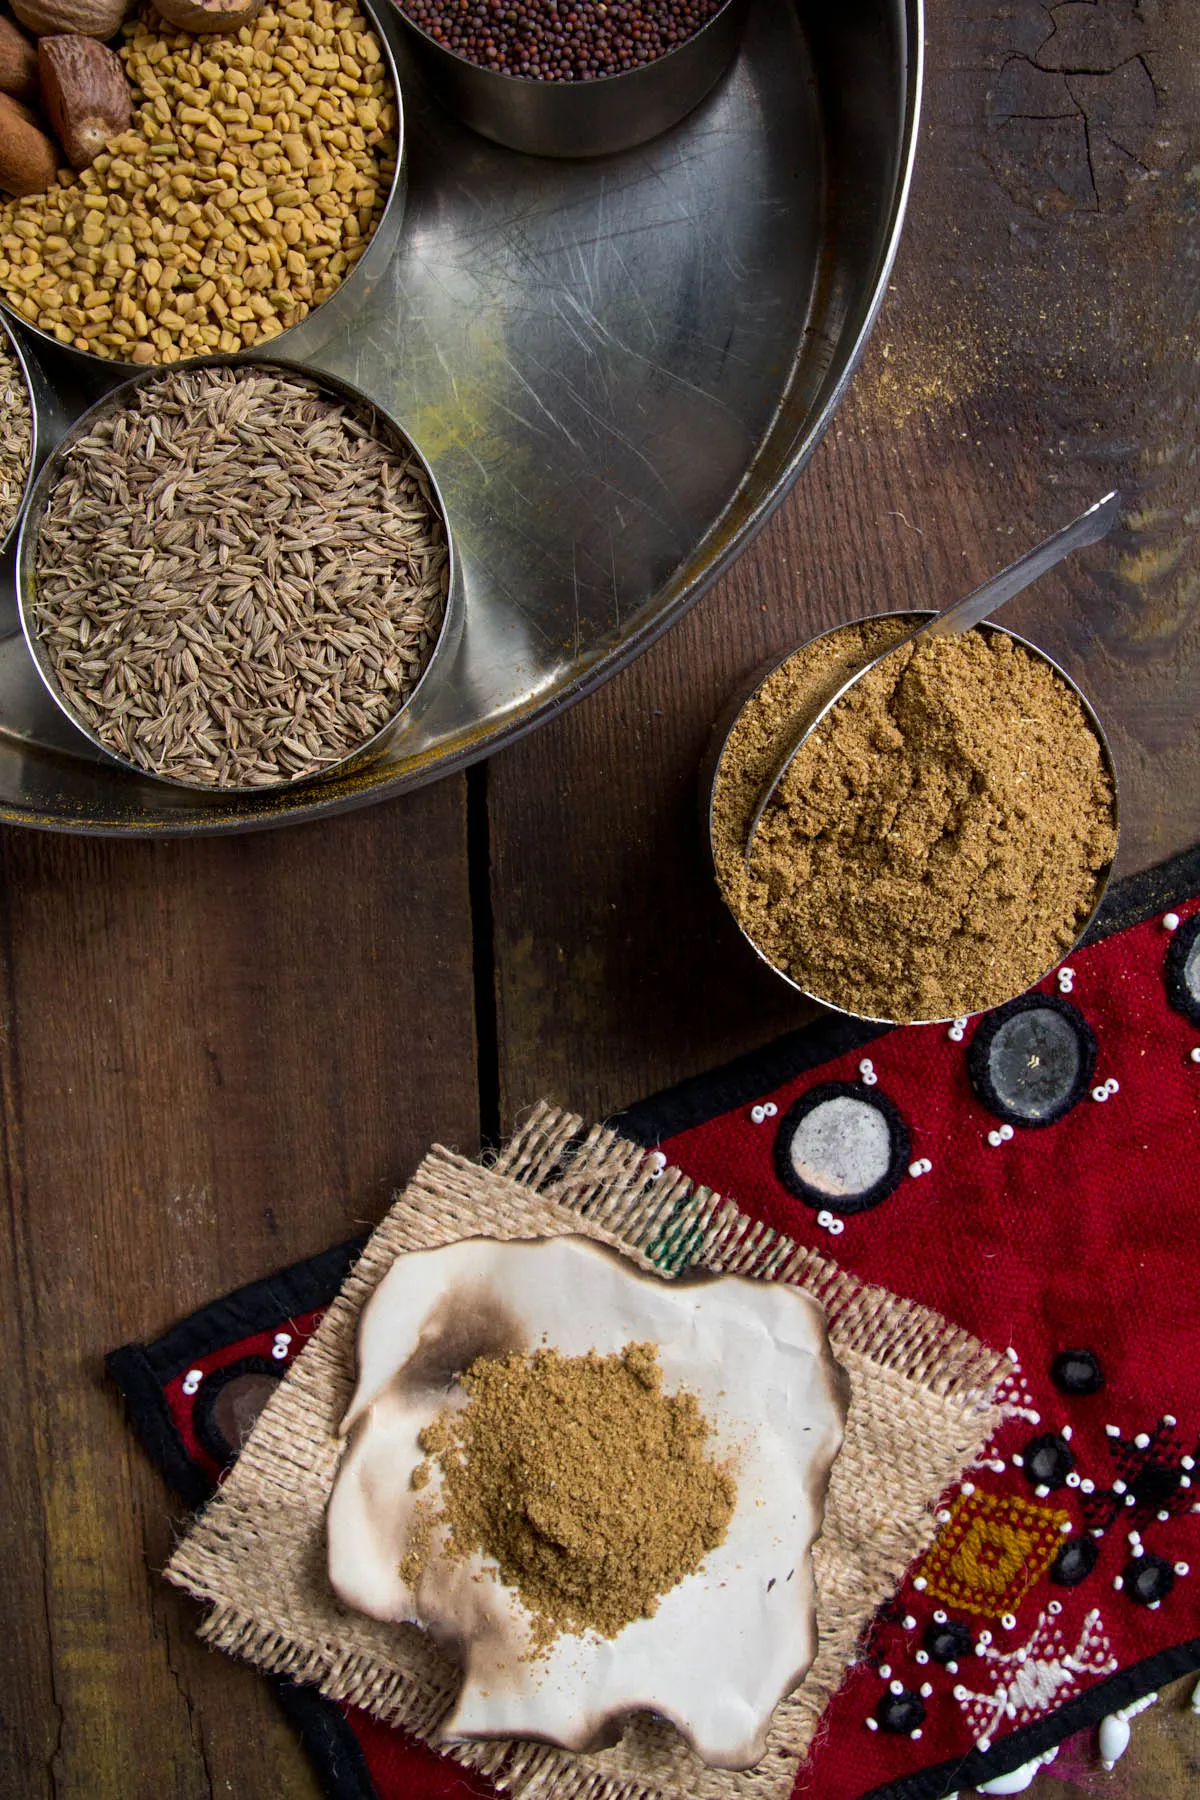 How to make Garam Masala from scratch by Indiaphile.info